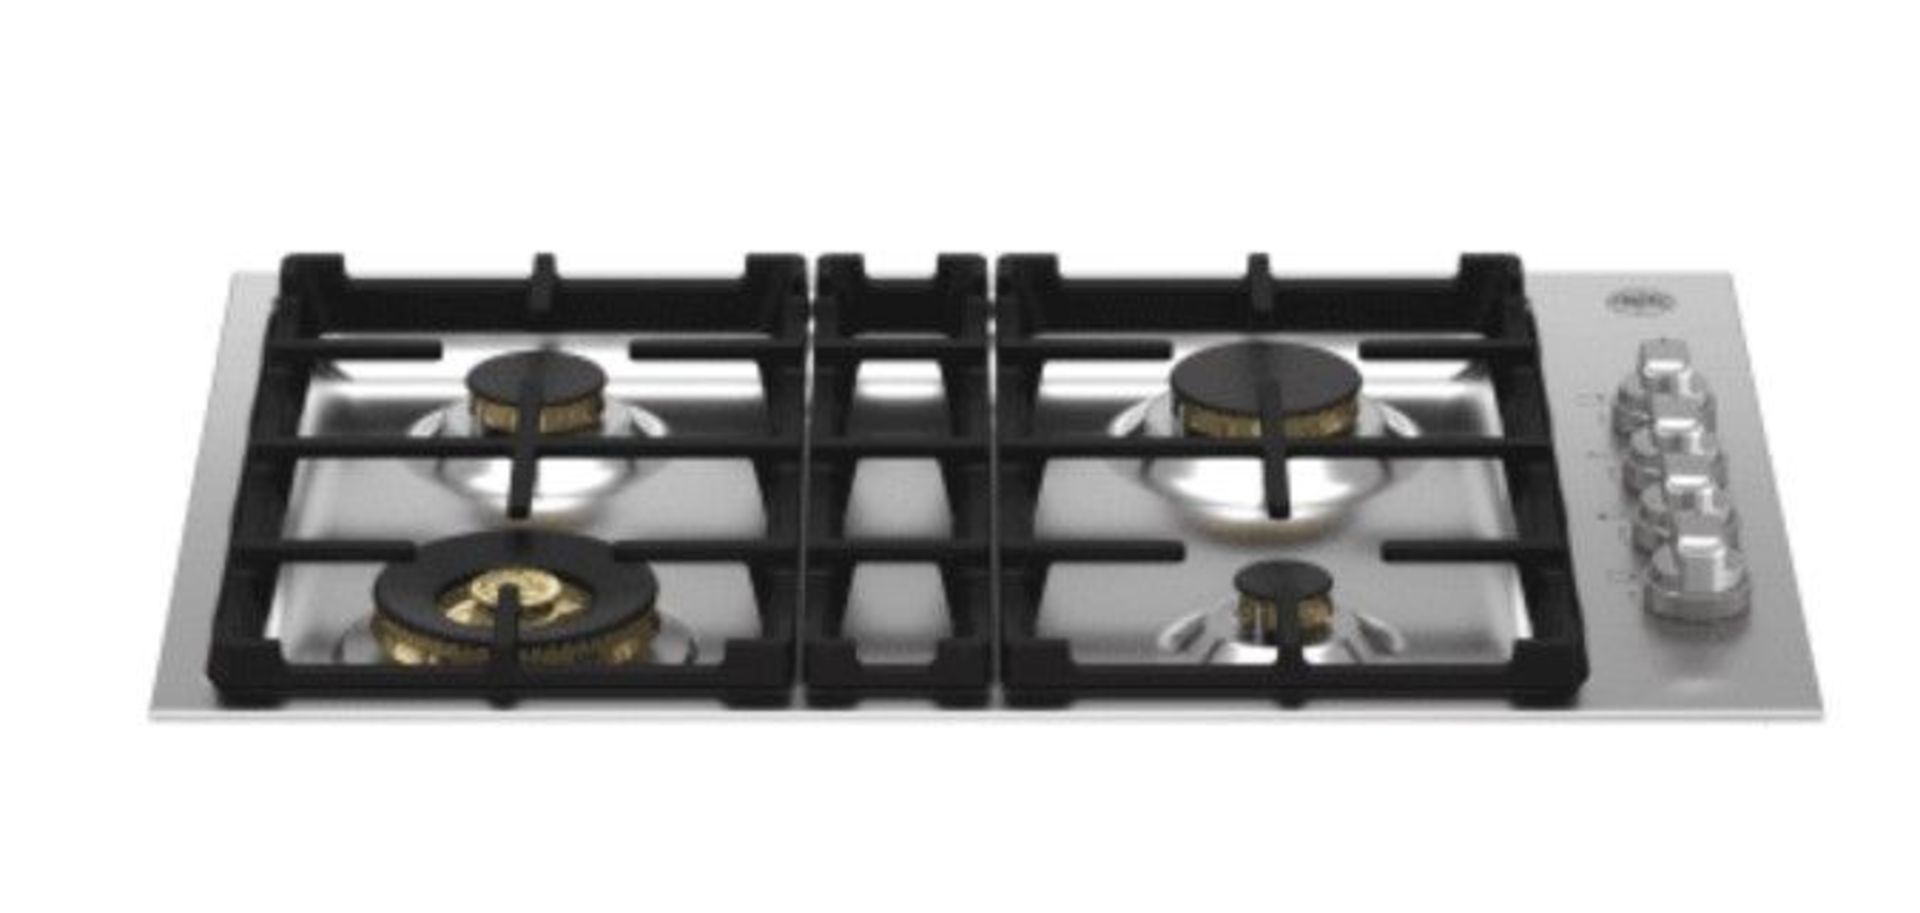 Cooktop with Brass Burners